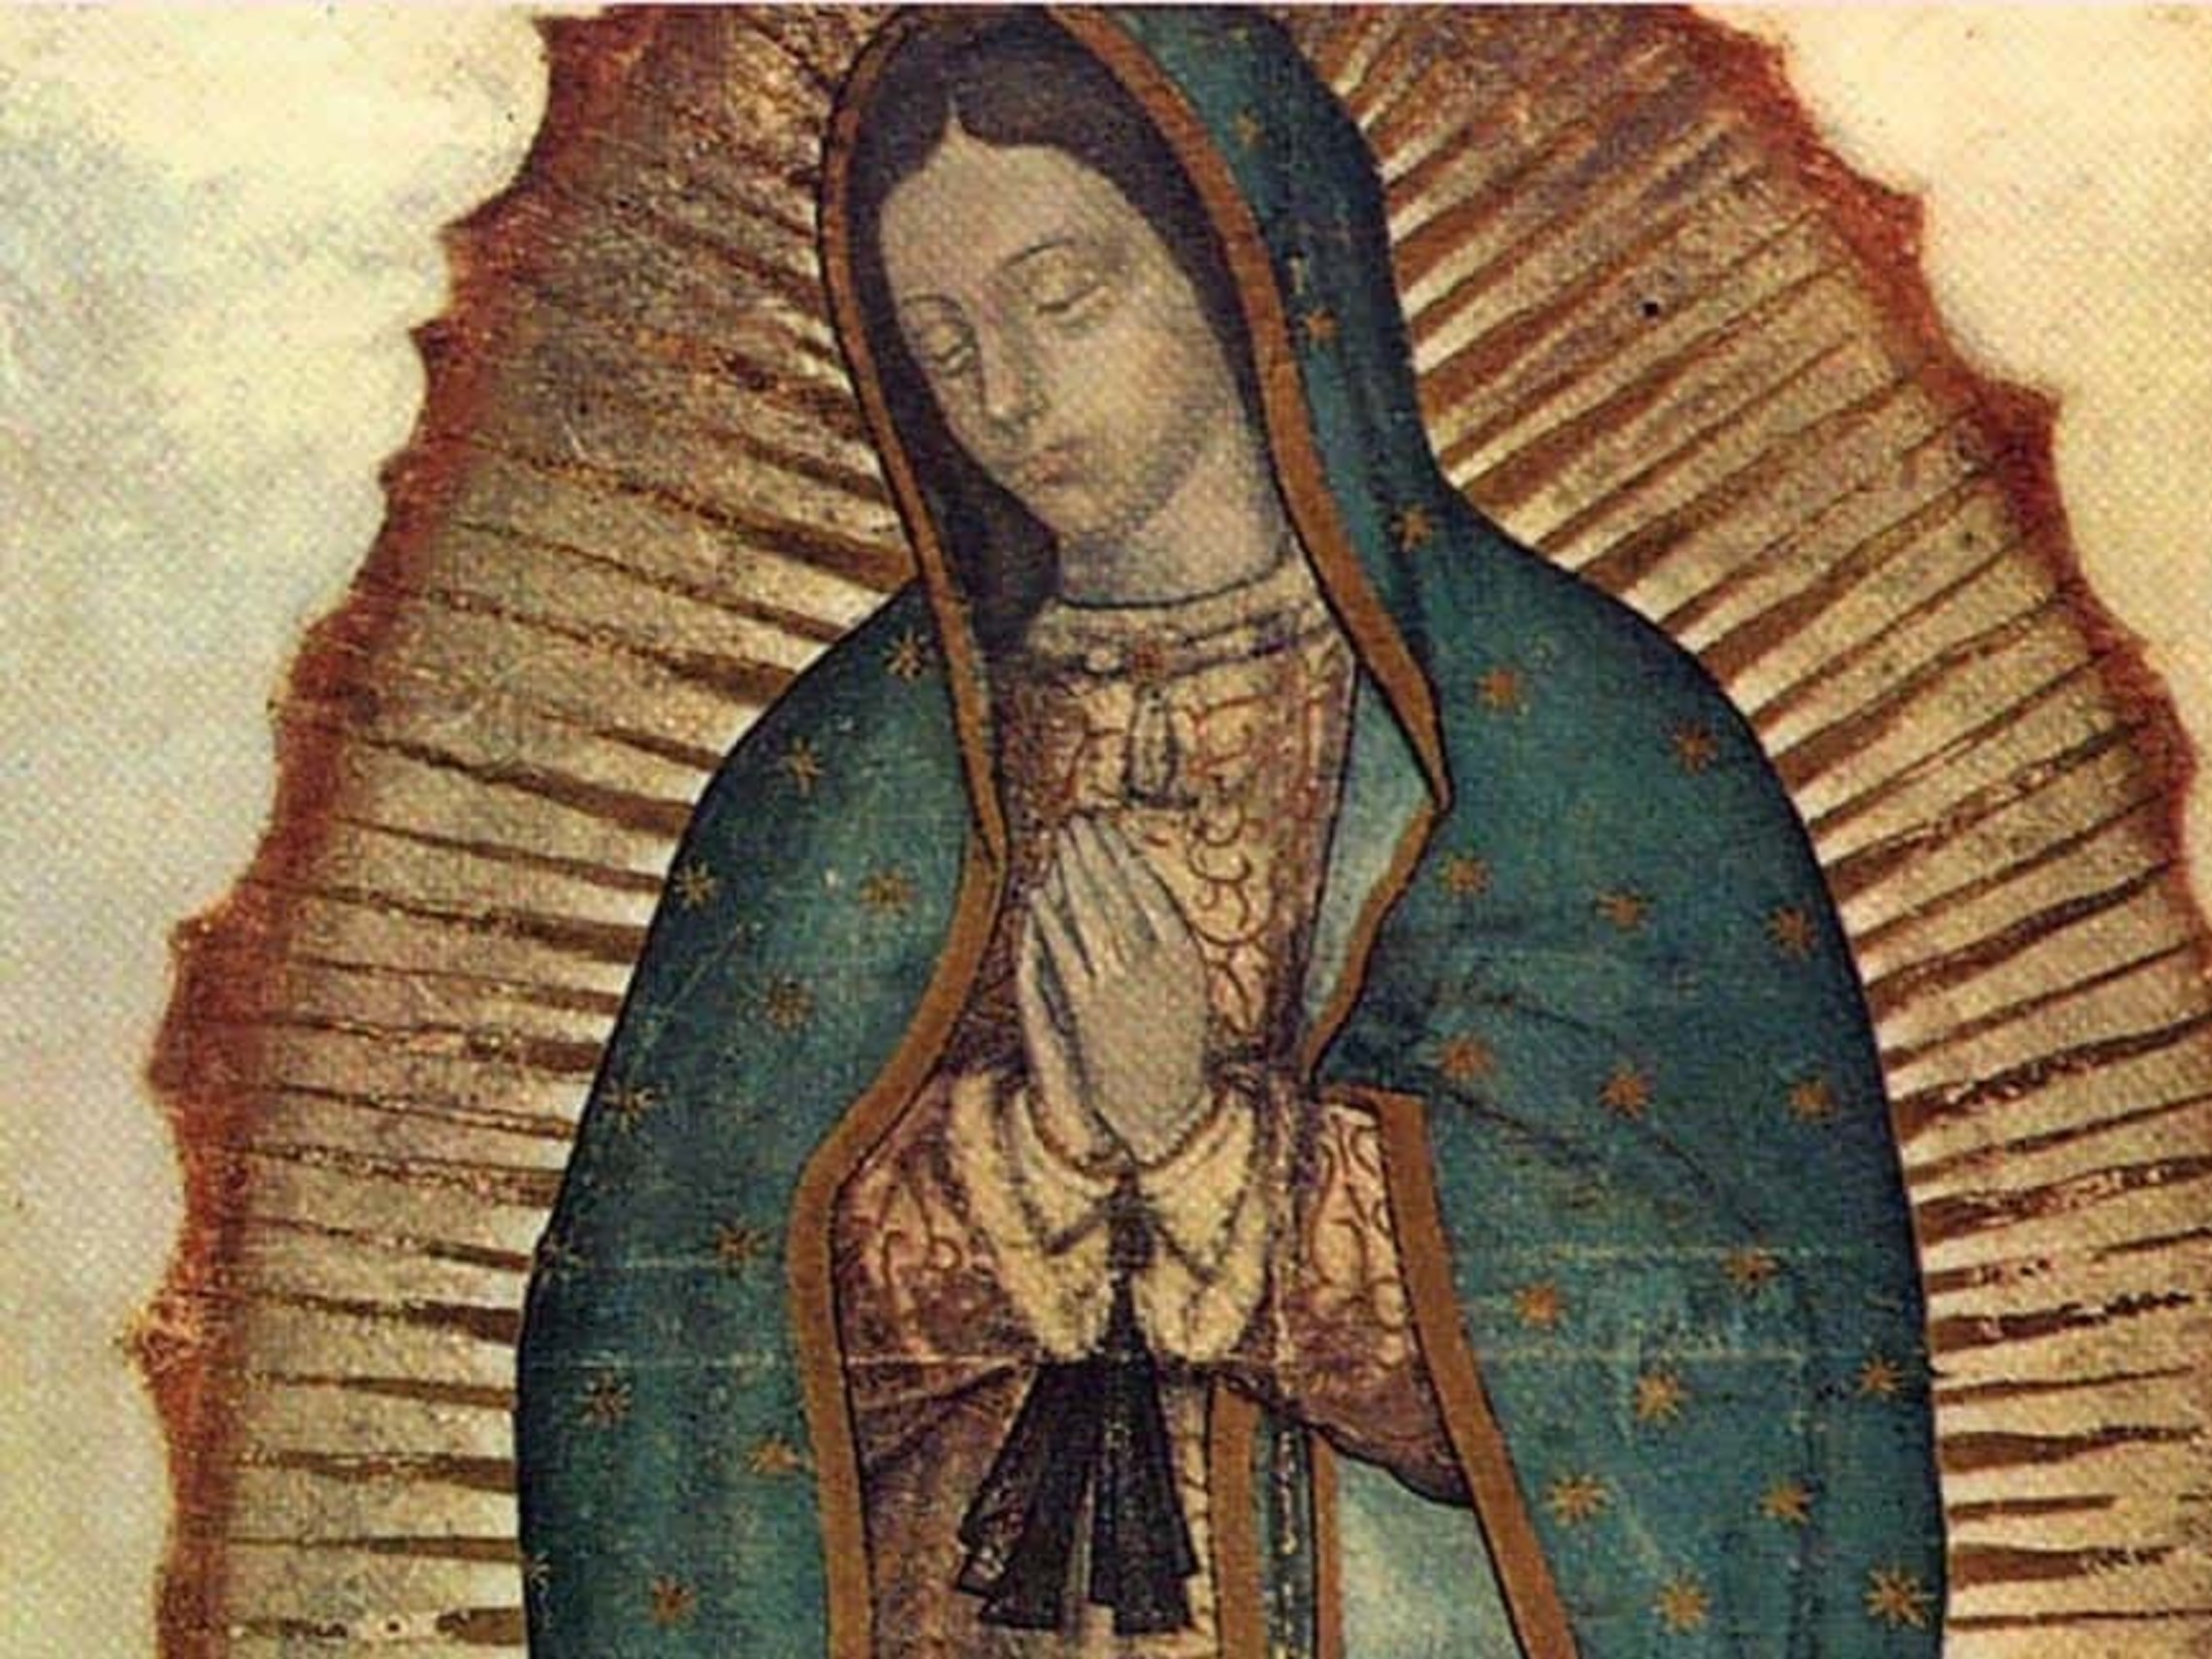 top portion of the image of Our Lady of Guadalupe